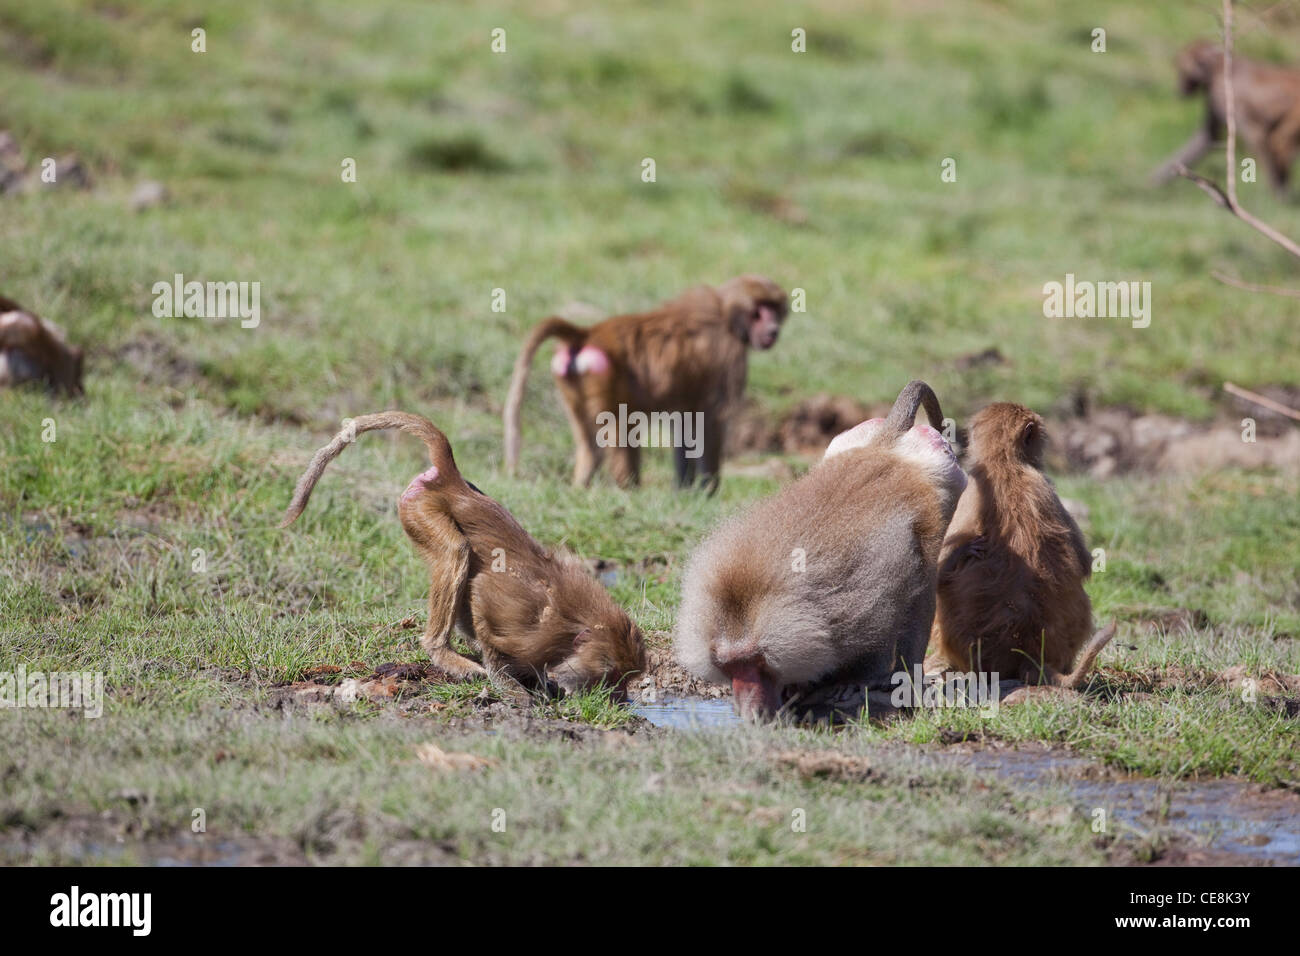 Hamadryas Baboons (Papio hamadryas). Member of a troop drinking from a watering hole. Awash National Park. Ethiopia. Stock Photo